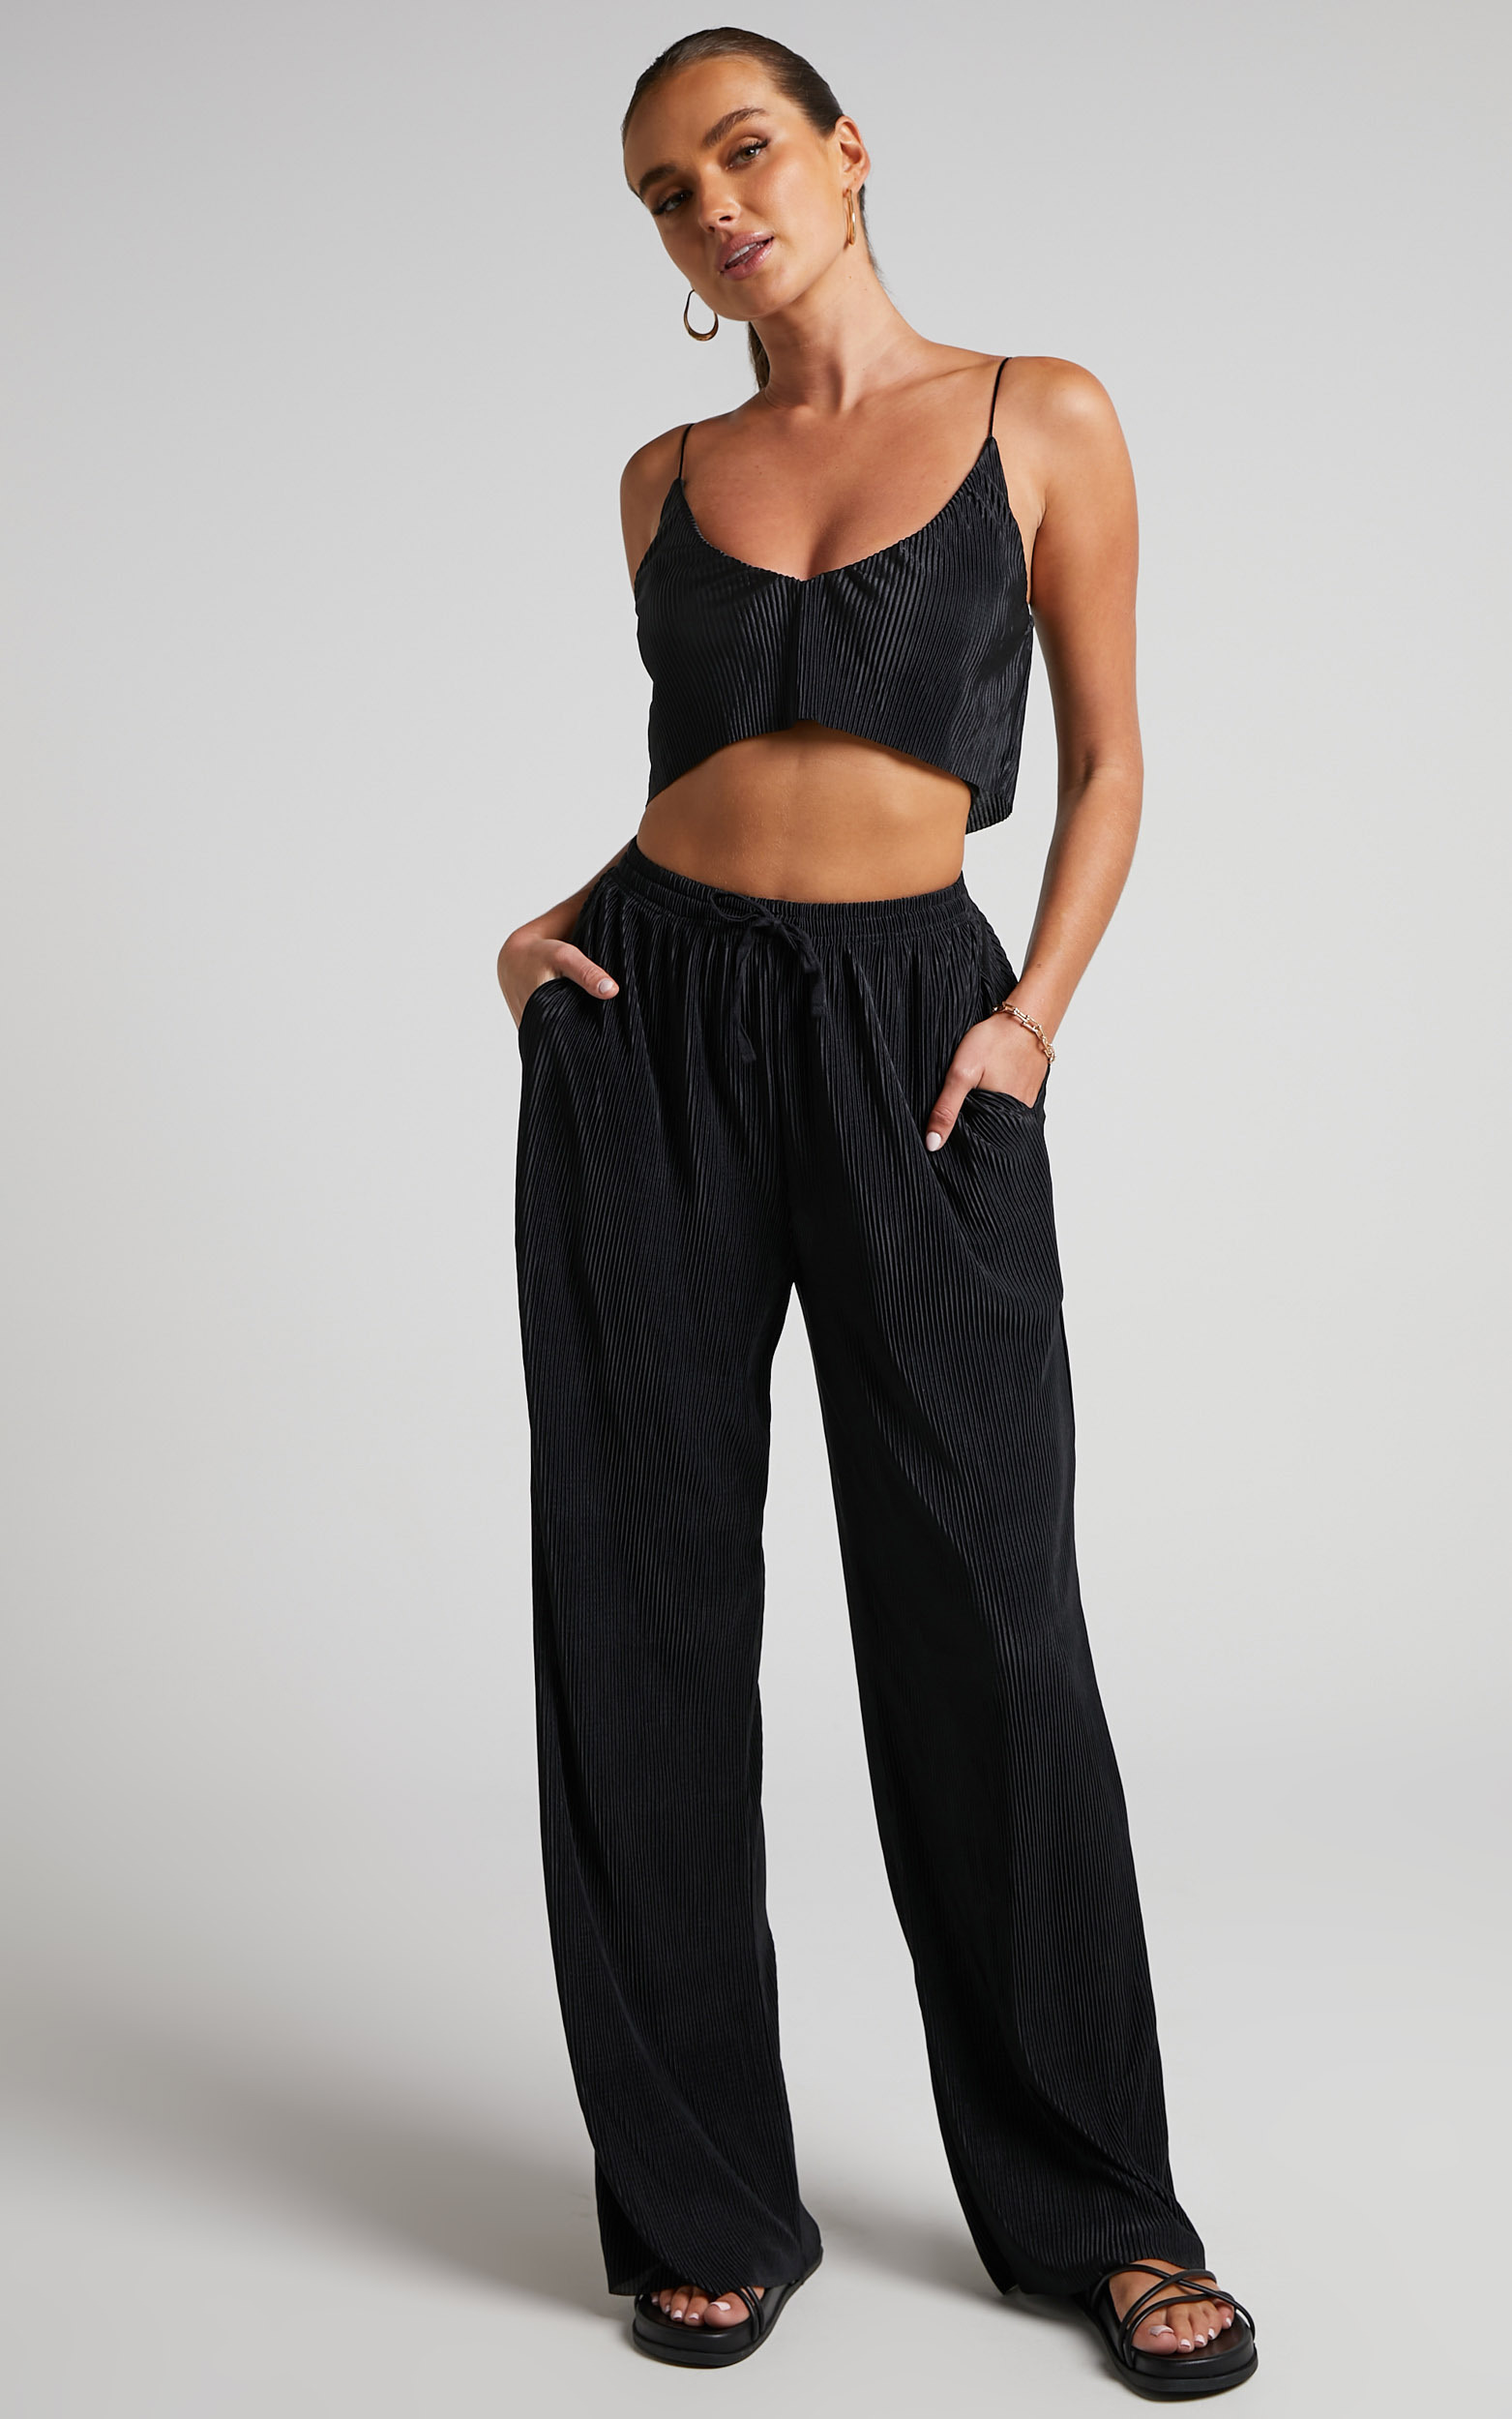 Elowen Two Piece Set - Plisse Crop Top and Relaxed Wide Leg Pants in Black - 04, BLK1, hi-res image number null